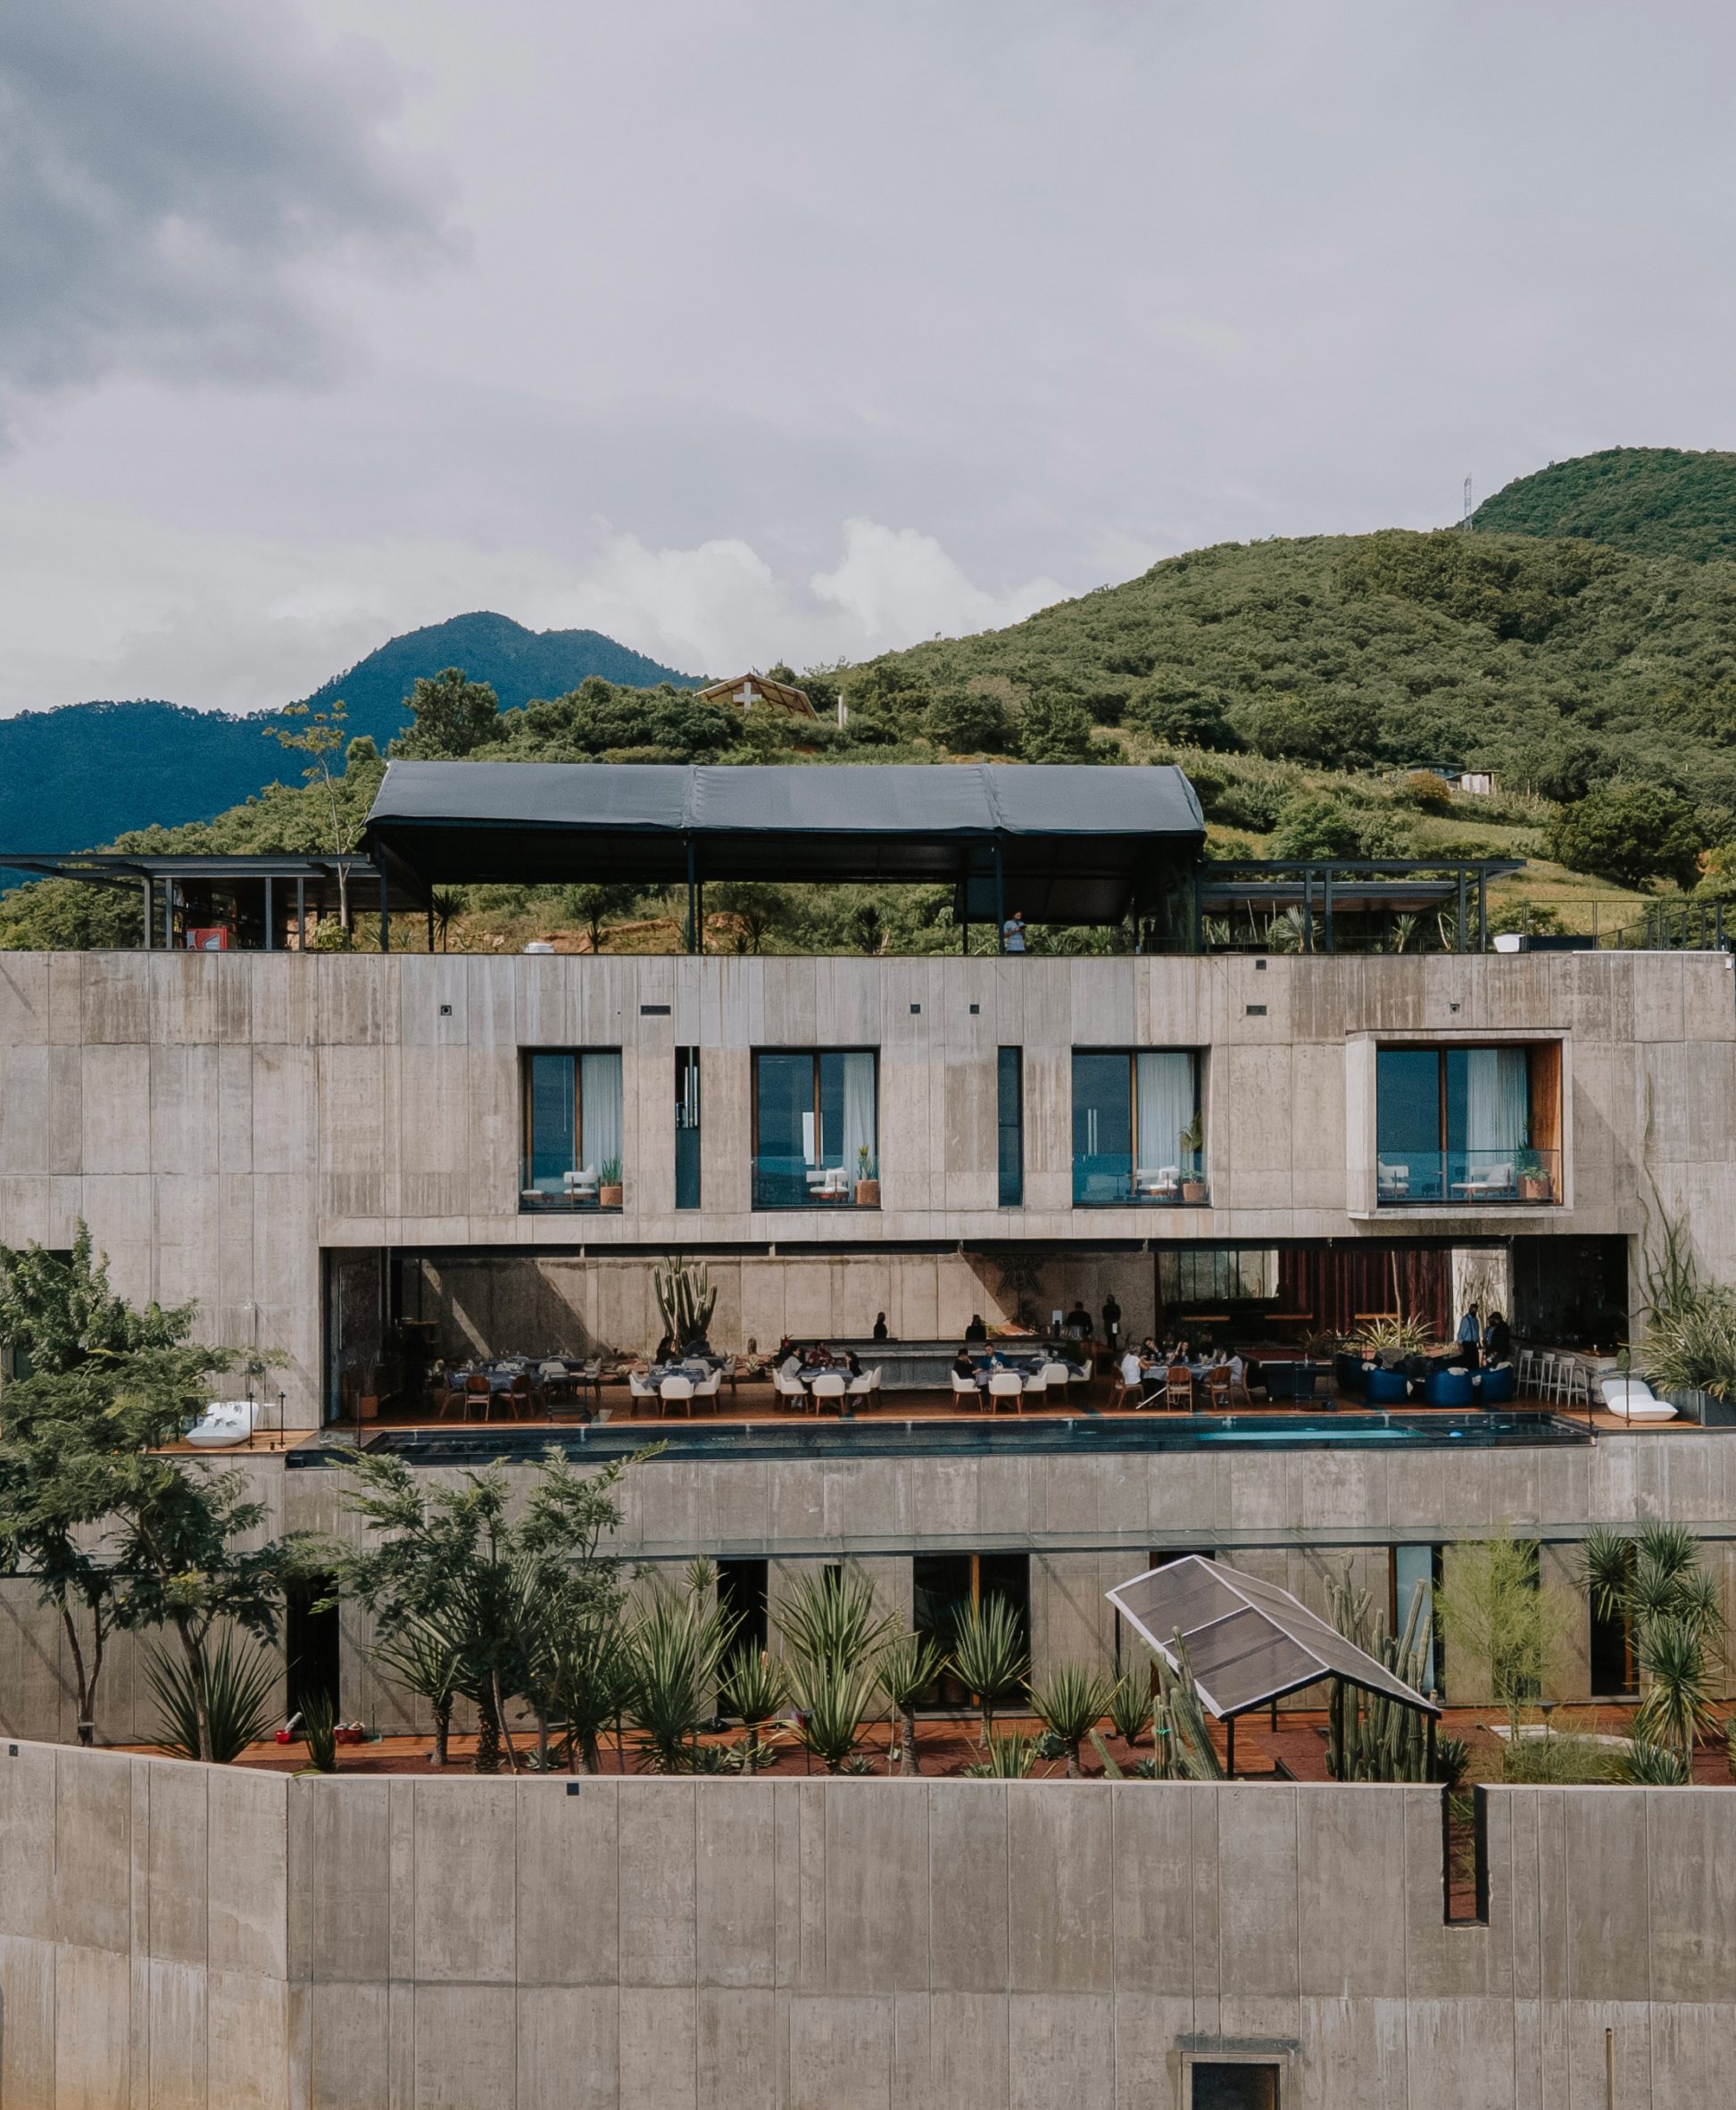 RootStudio designs sculptural Hotel Flavia in Oaxaca without plans